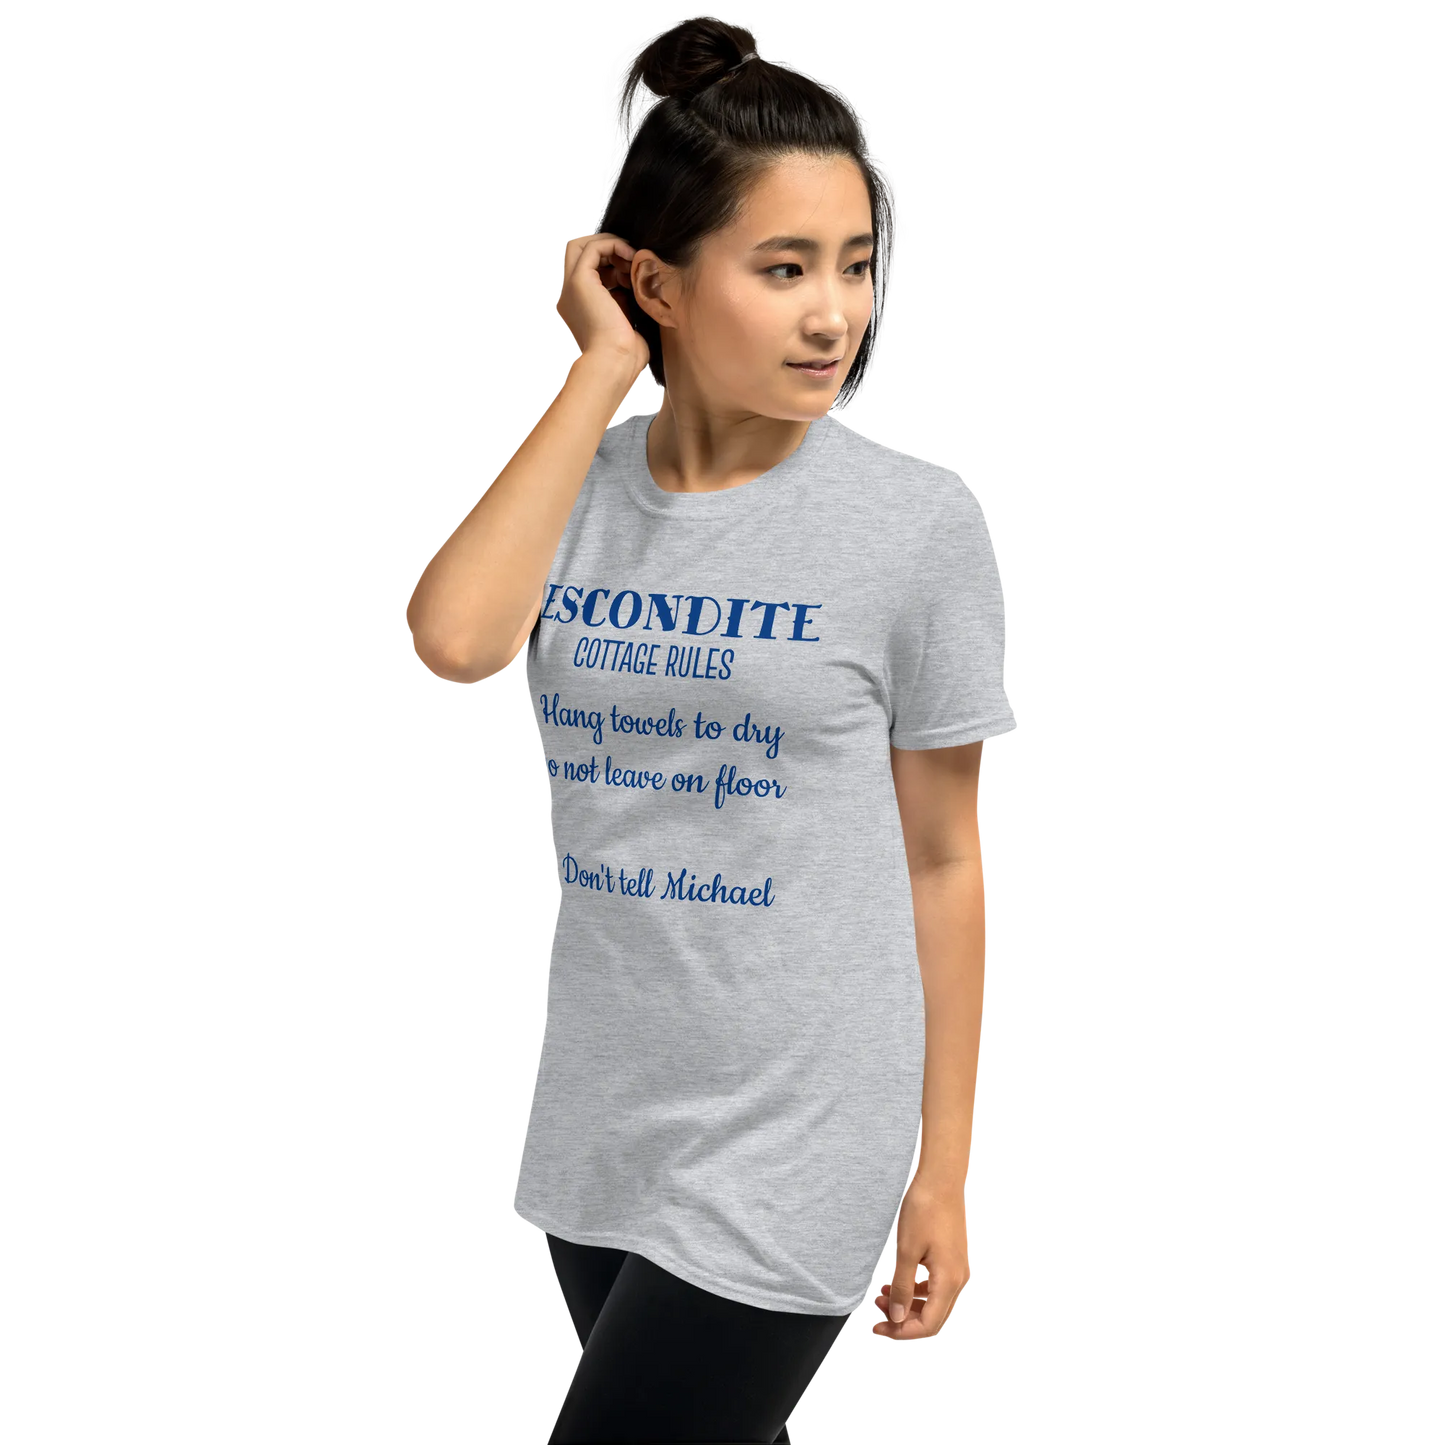 ESCONDITE Cottage Rules Tee in Sport Grey on woman left